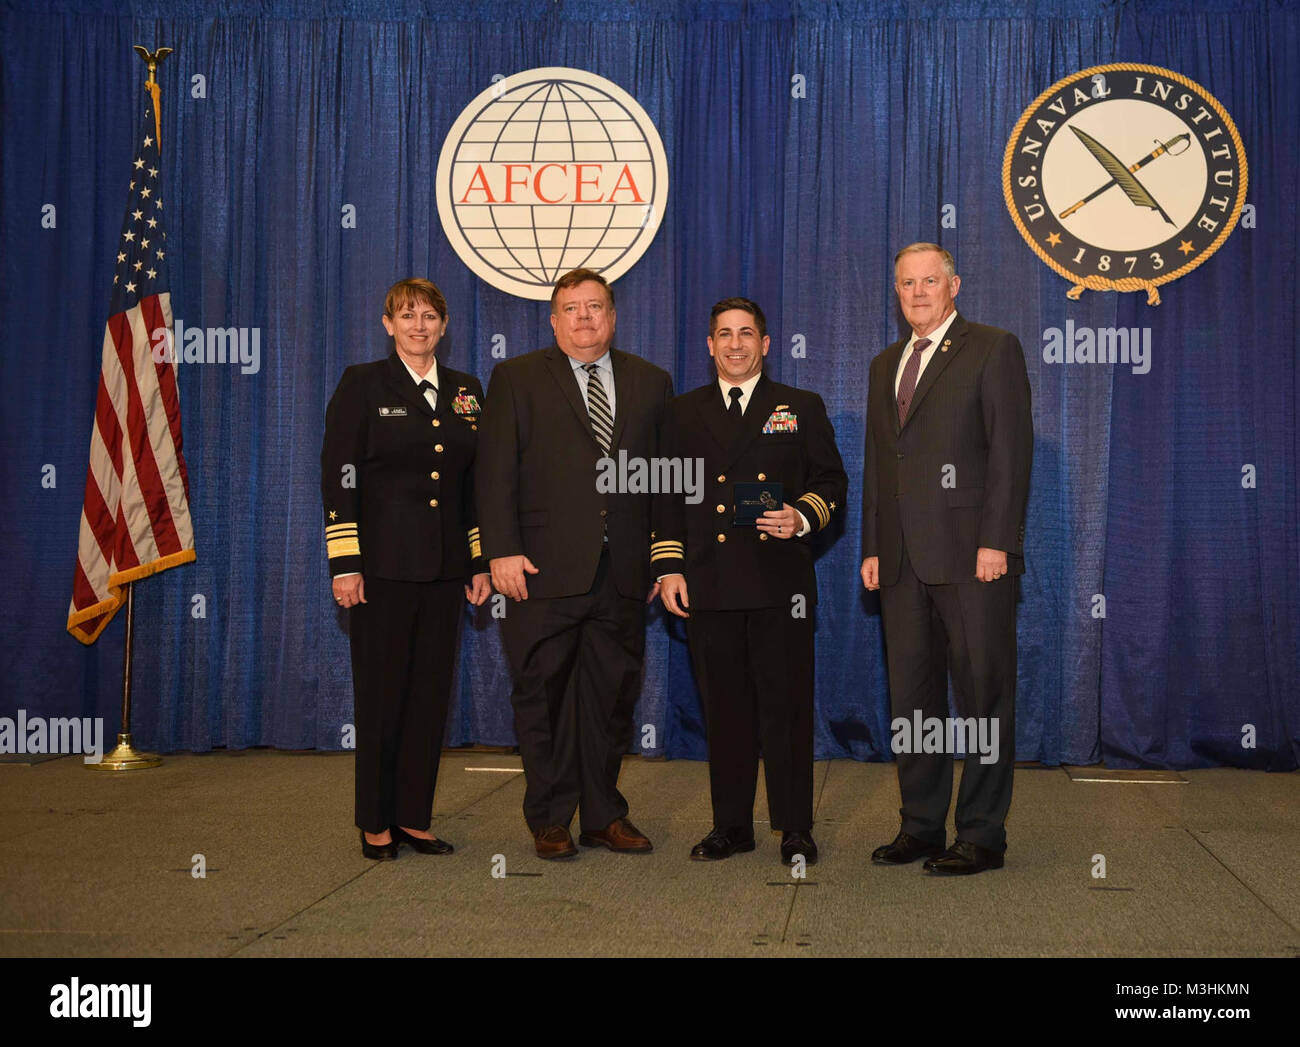 SAN DIEGO (February 6, 2018) From left; Vice Adm. Jan Tighe, deputy chief of naval operations for information warfare/director of naval intelligence; retired Vice Adm. Peter Daly, CEO of the U.S. Naval Institute; Lt. Cmdr. Chris Weiss, deputy branch chief for future capabilities development at U.S. Fleet Cyber Command/U.S. 10th Fleet; and retired Lt. Gen. Robert Shea, president and CEO of the Armed Forces Communications and Electronics Association (AFCEA) International, pose for a Stock Photo